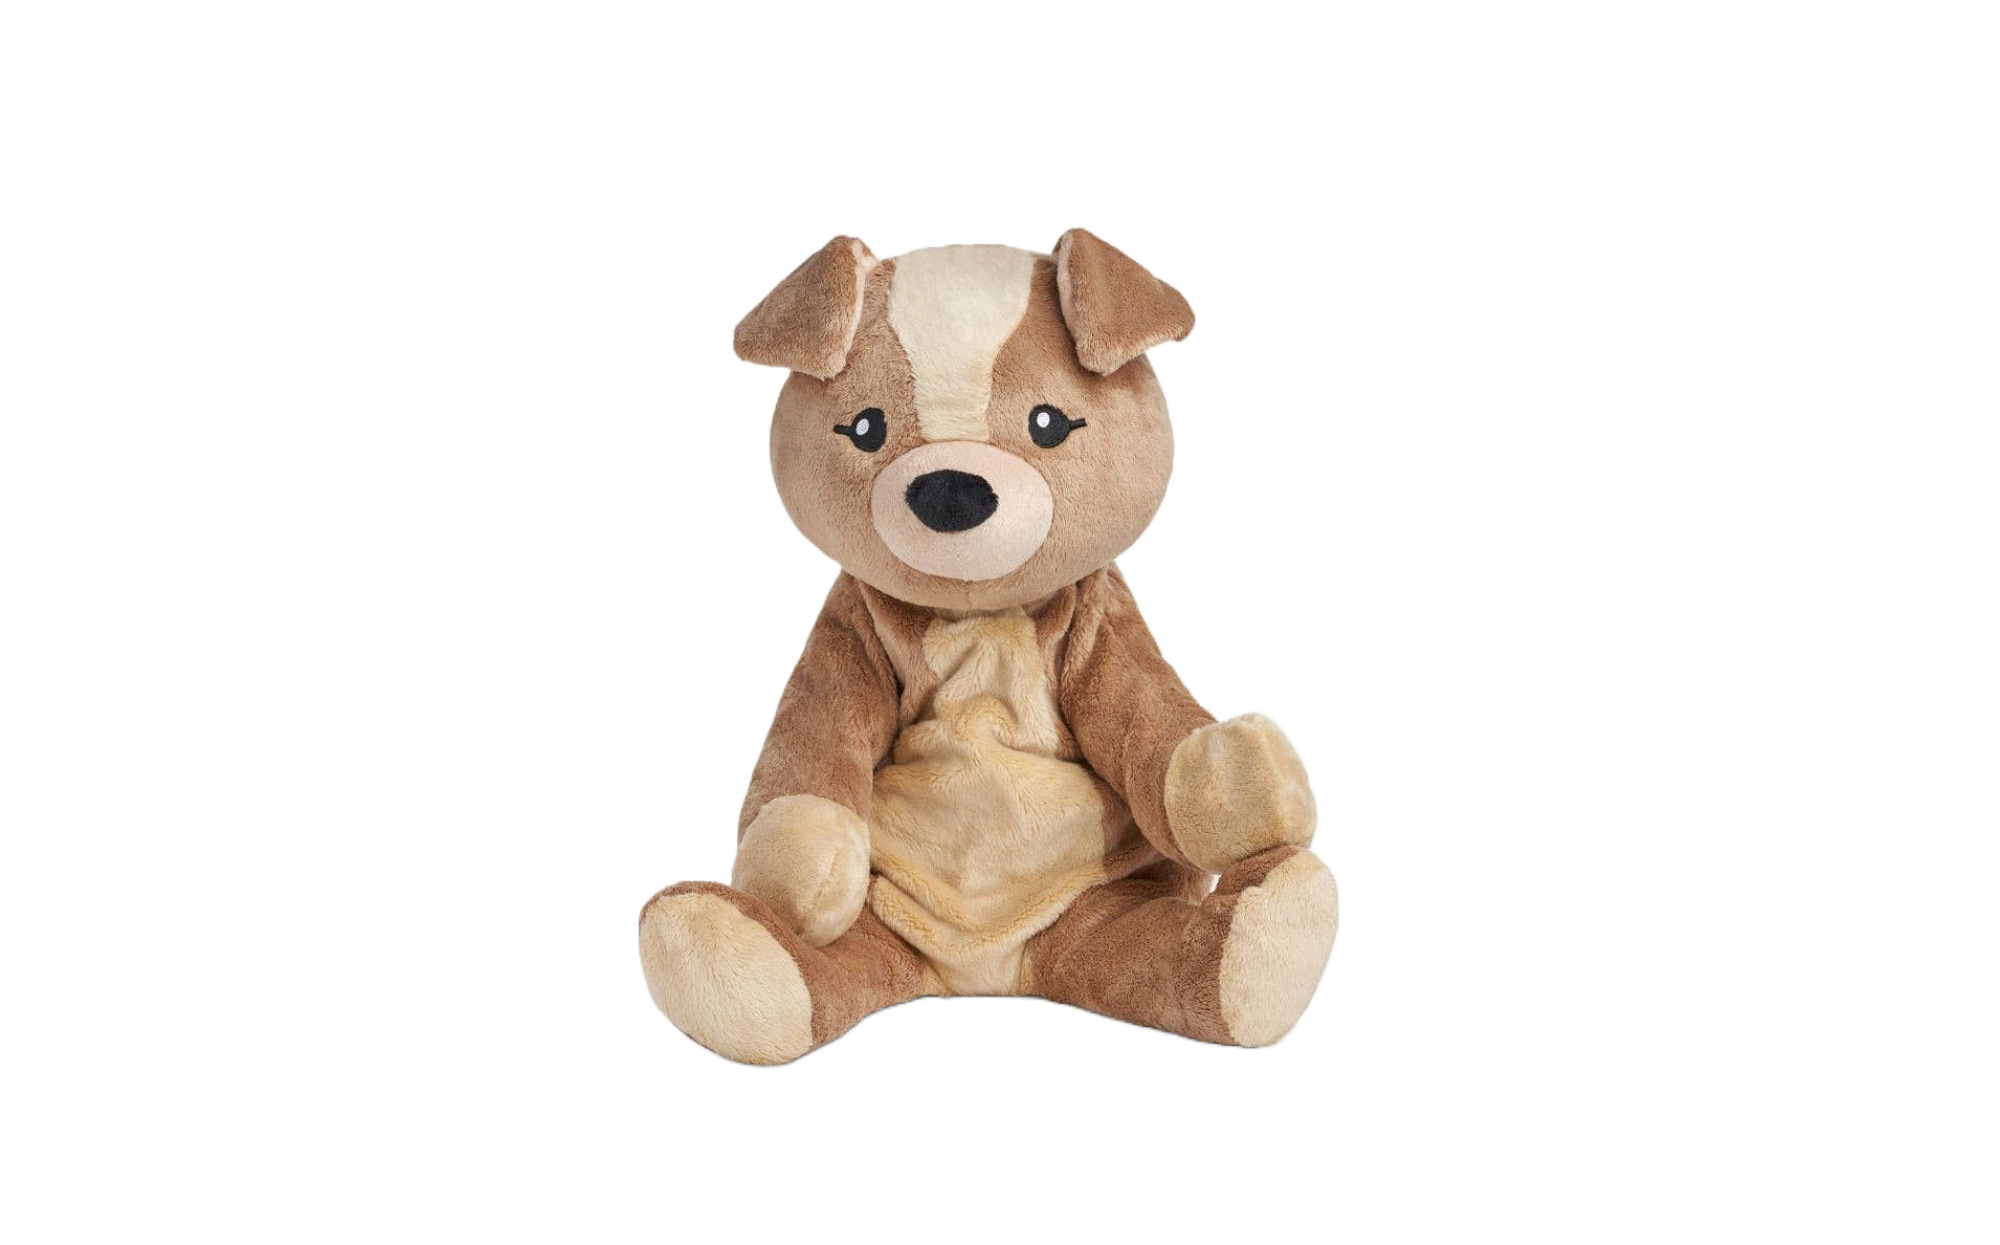 Weighted Puppy - Weights & Comfort Sensory Toy